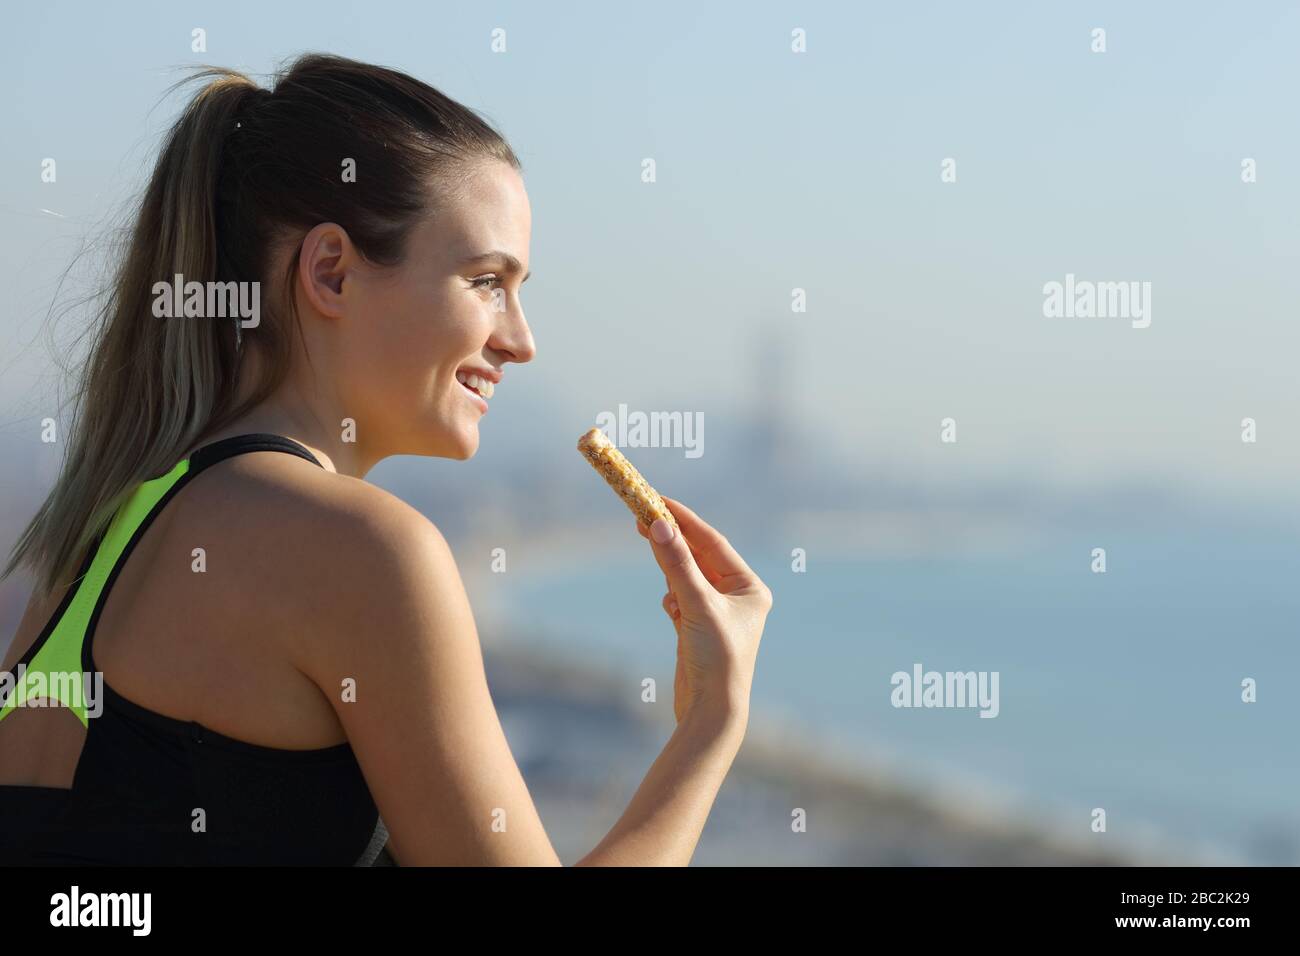 Happy runner woman eating energy bar after exercise contemplating beach views Stock Photo